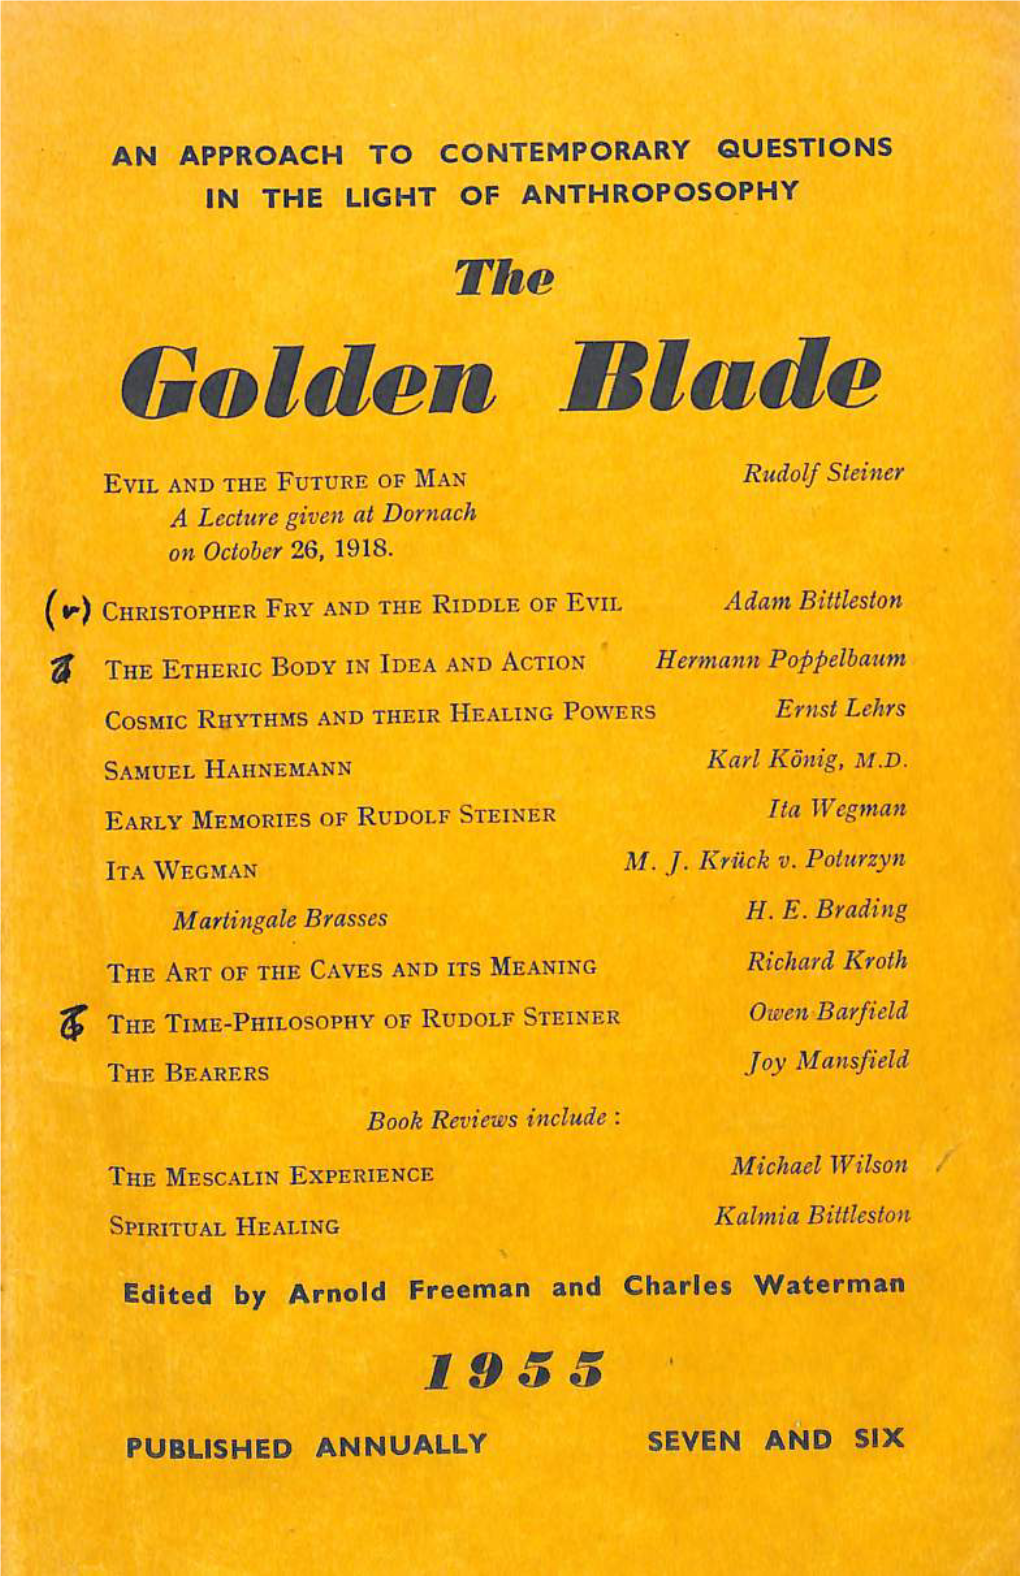 Golden Blade Evil and the Future of Man Rudolf Steiner a Lecture Given at Dornach on October 26, 1918